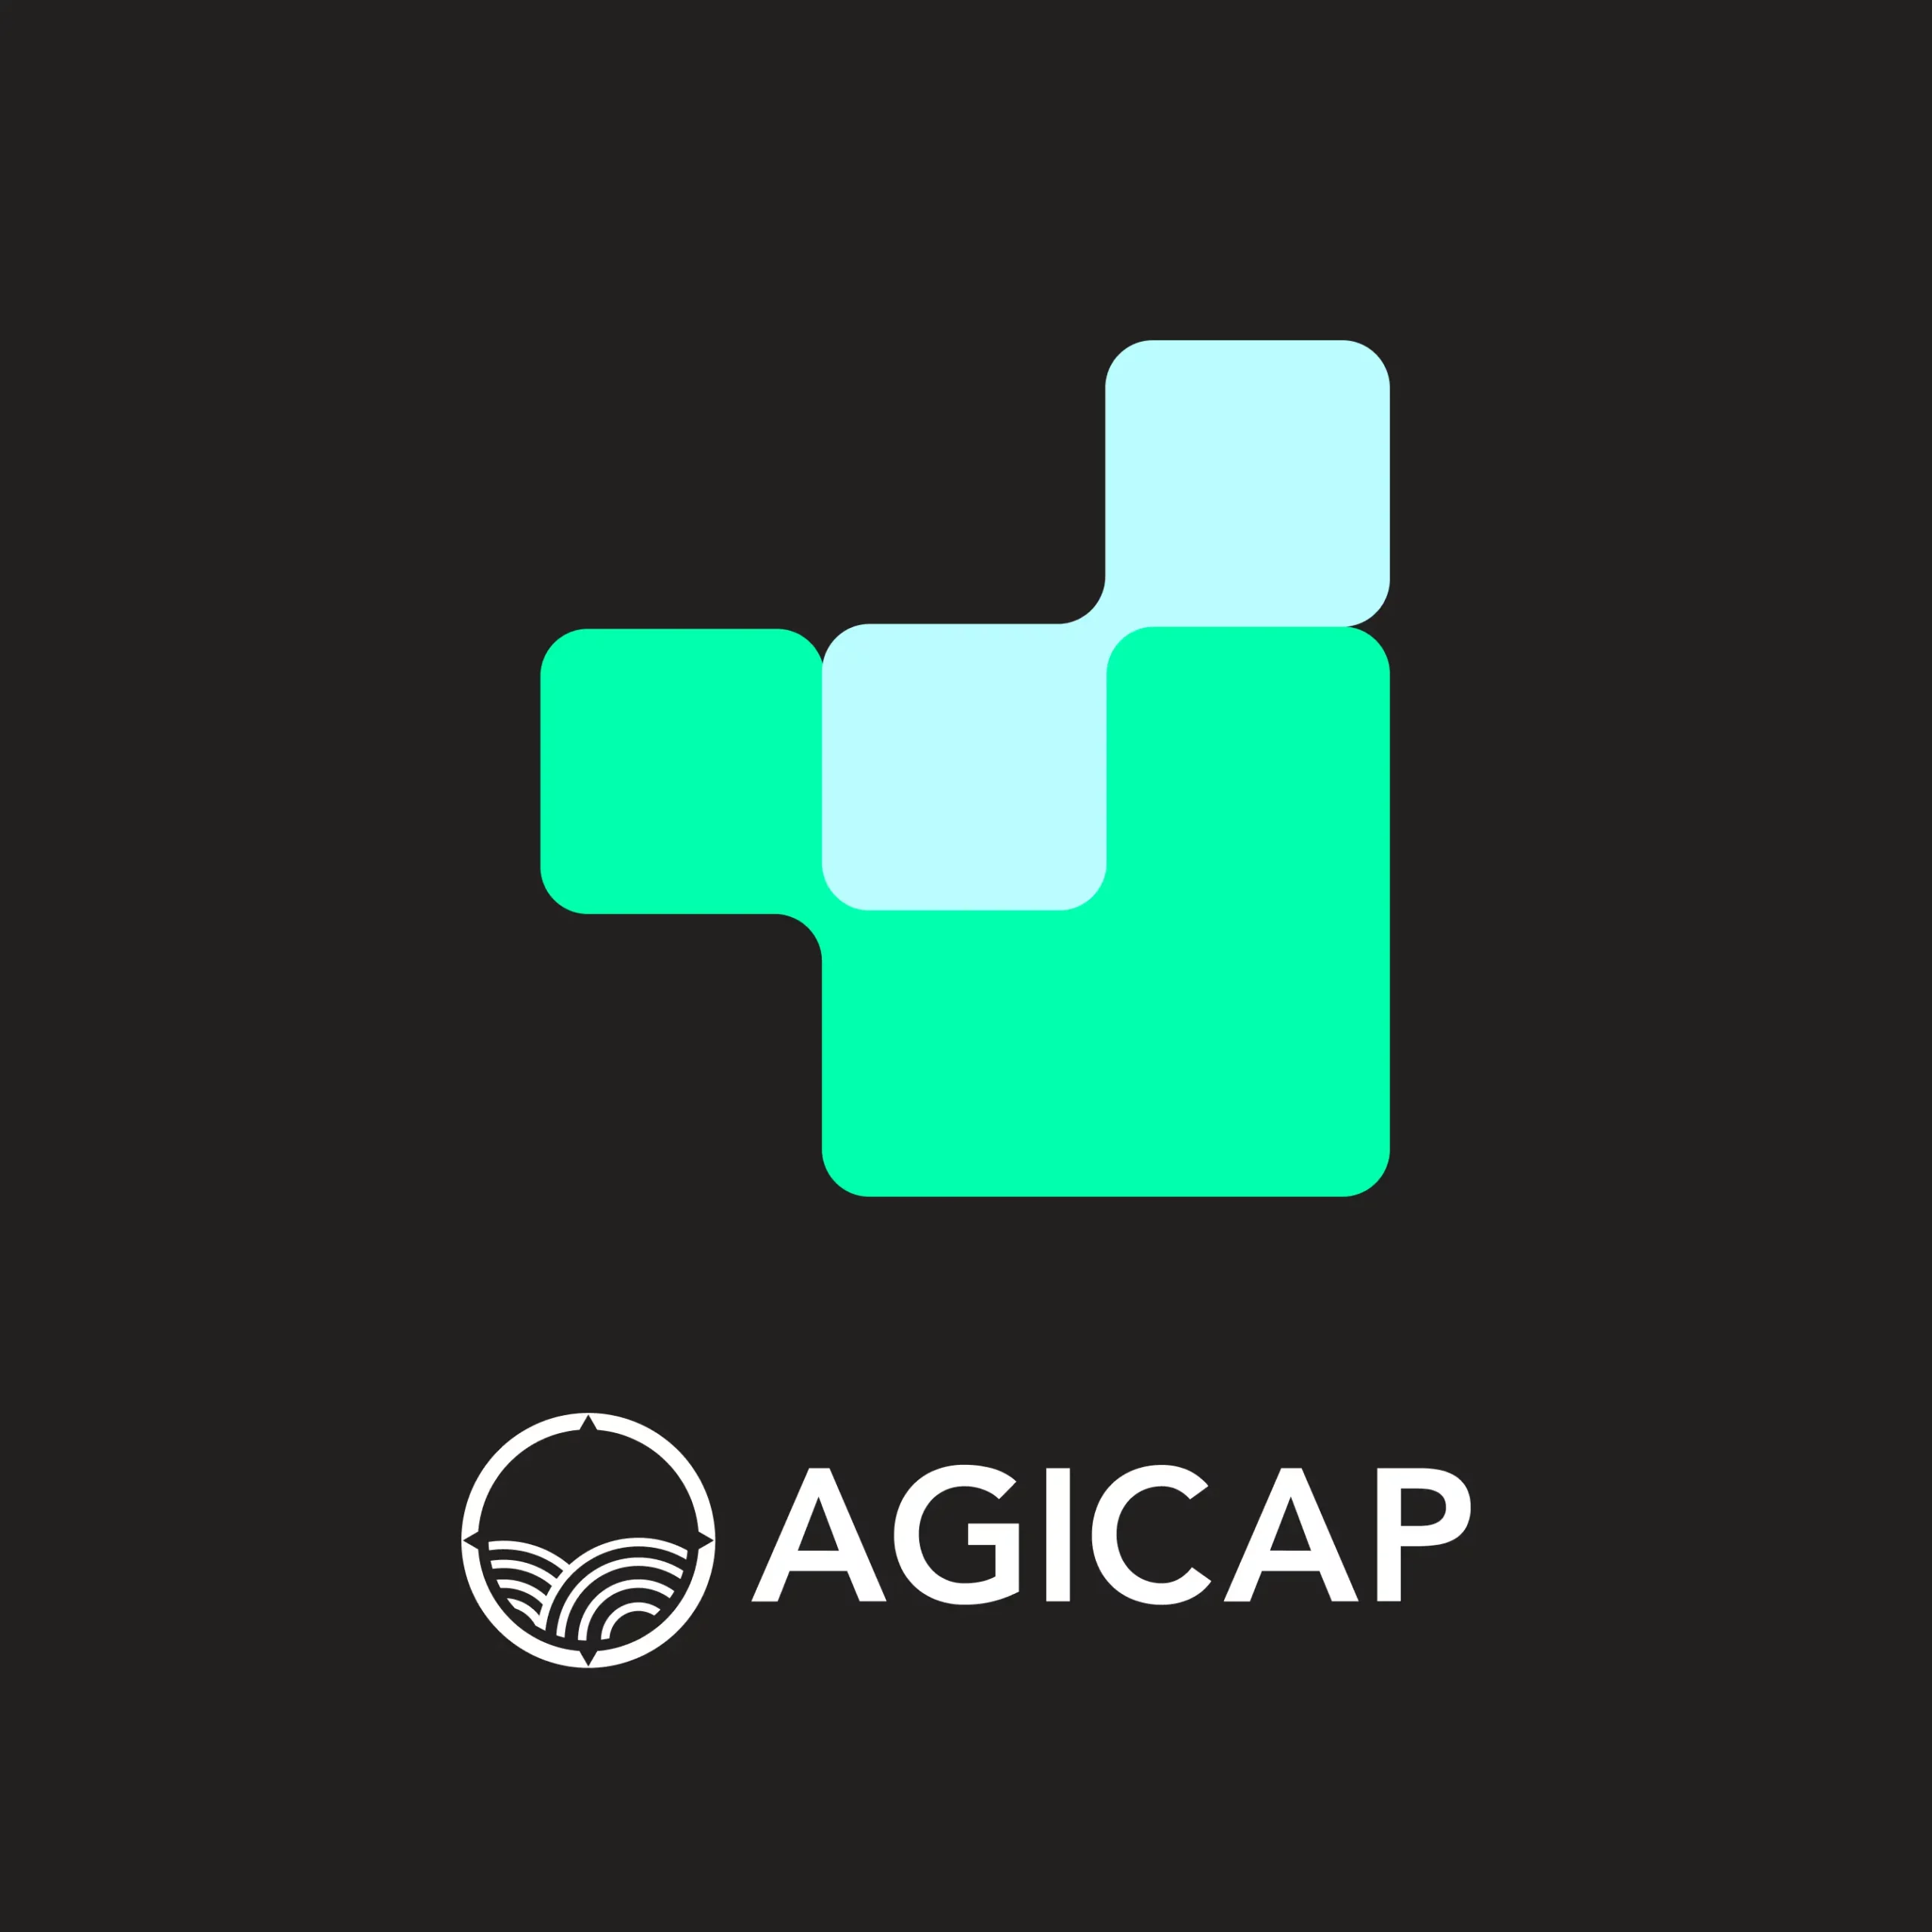 Agicap case study selling your first 5,000 orders abroad